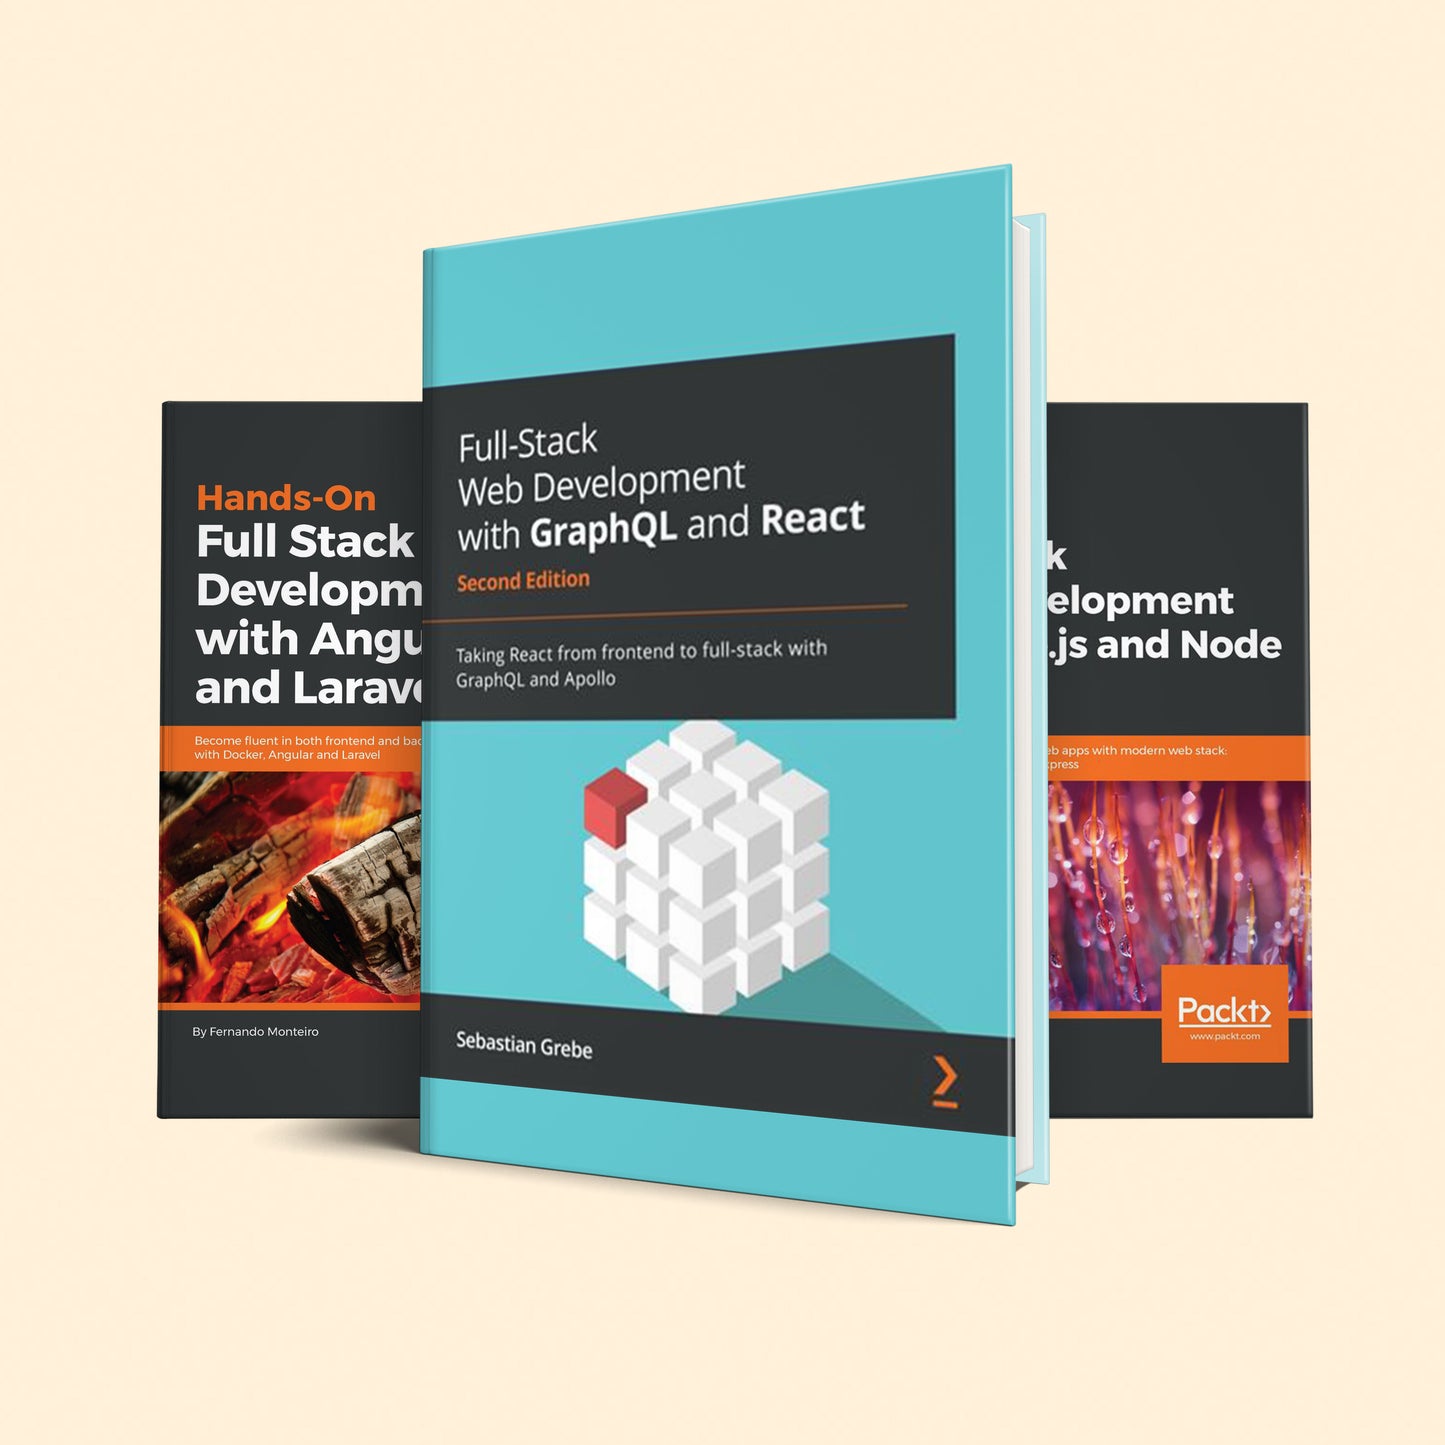 3 Full Stack Web Development Books : Full-Stack Web Development with GraphQL and React, Vue.js and Node, Angular 6 and Laravel 5